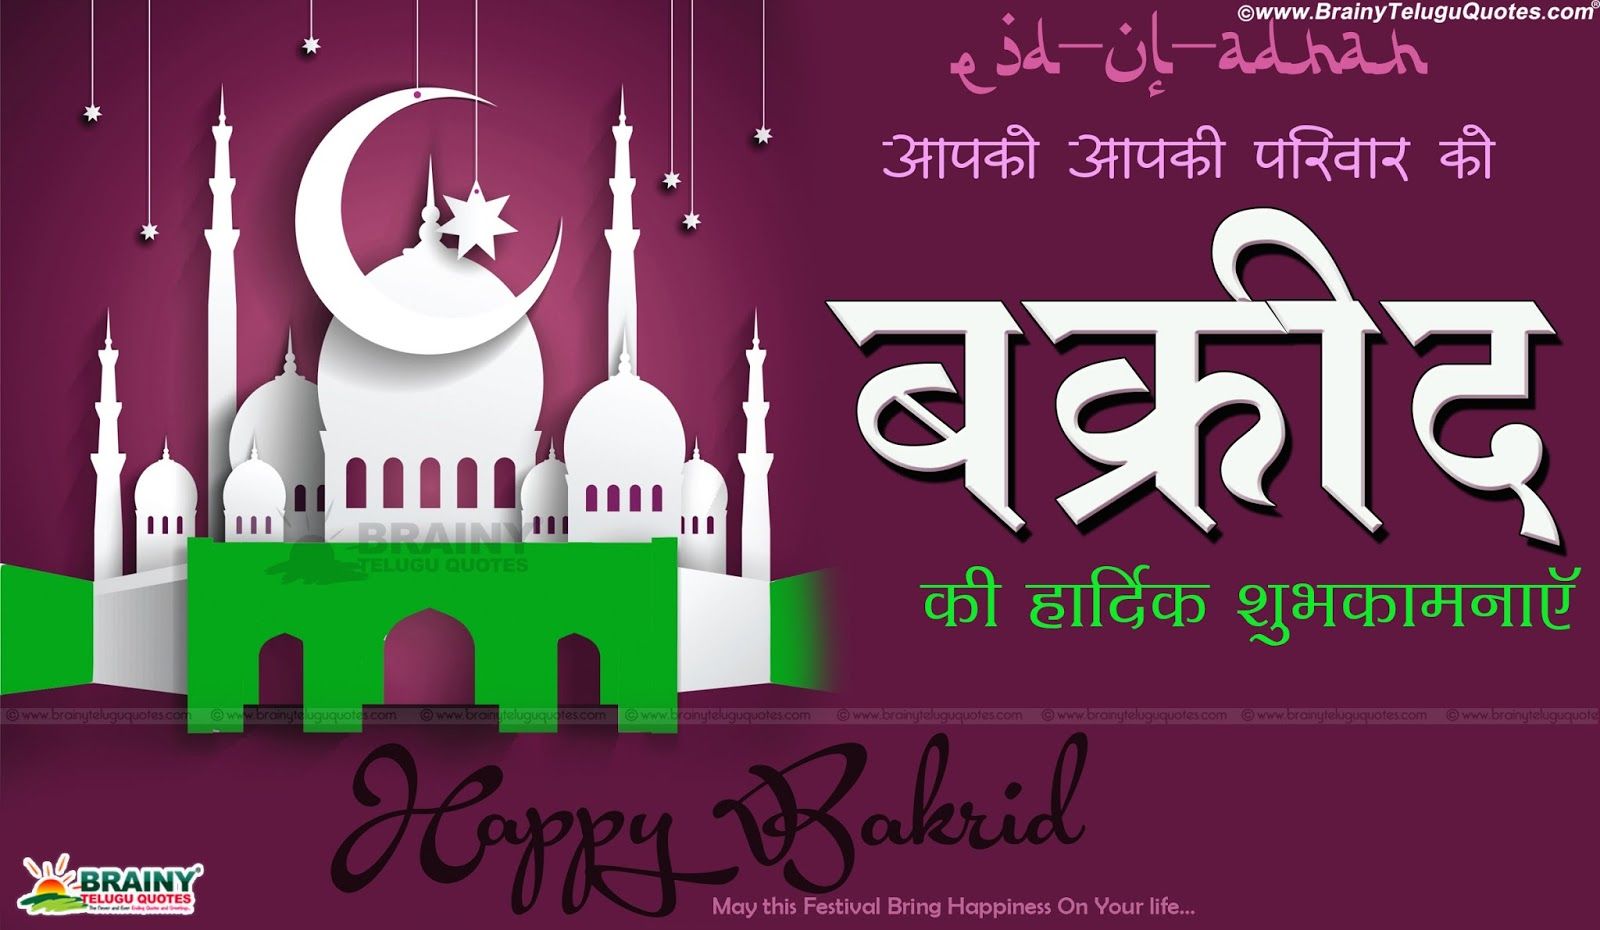 Eid Ul Azha Messages. Bakrid Messages. Bakra Eid Messages. BrainyTeluguQuotes.comTelugu Quotes. English Quotes. Hindi Quotes. Tamil Quotes. Greetings